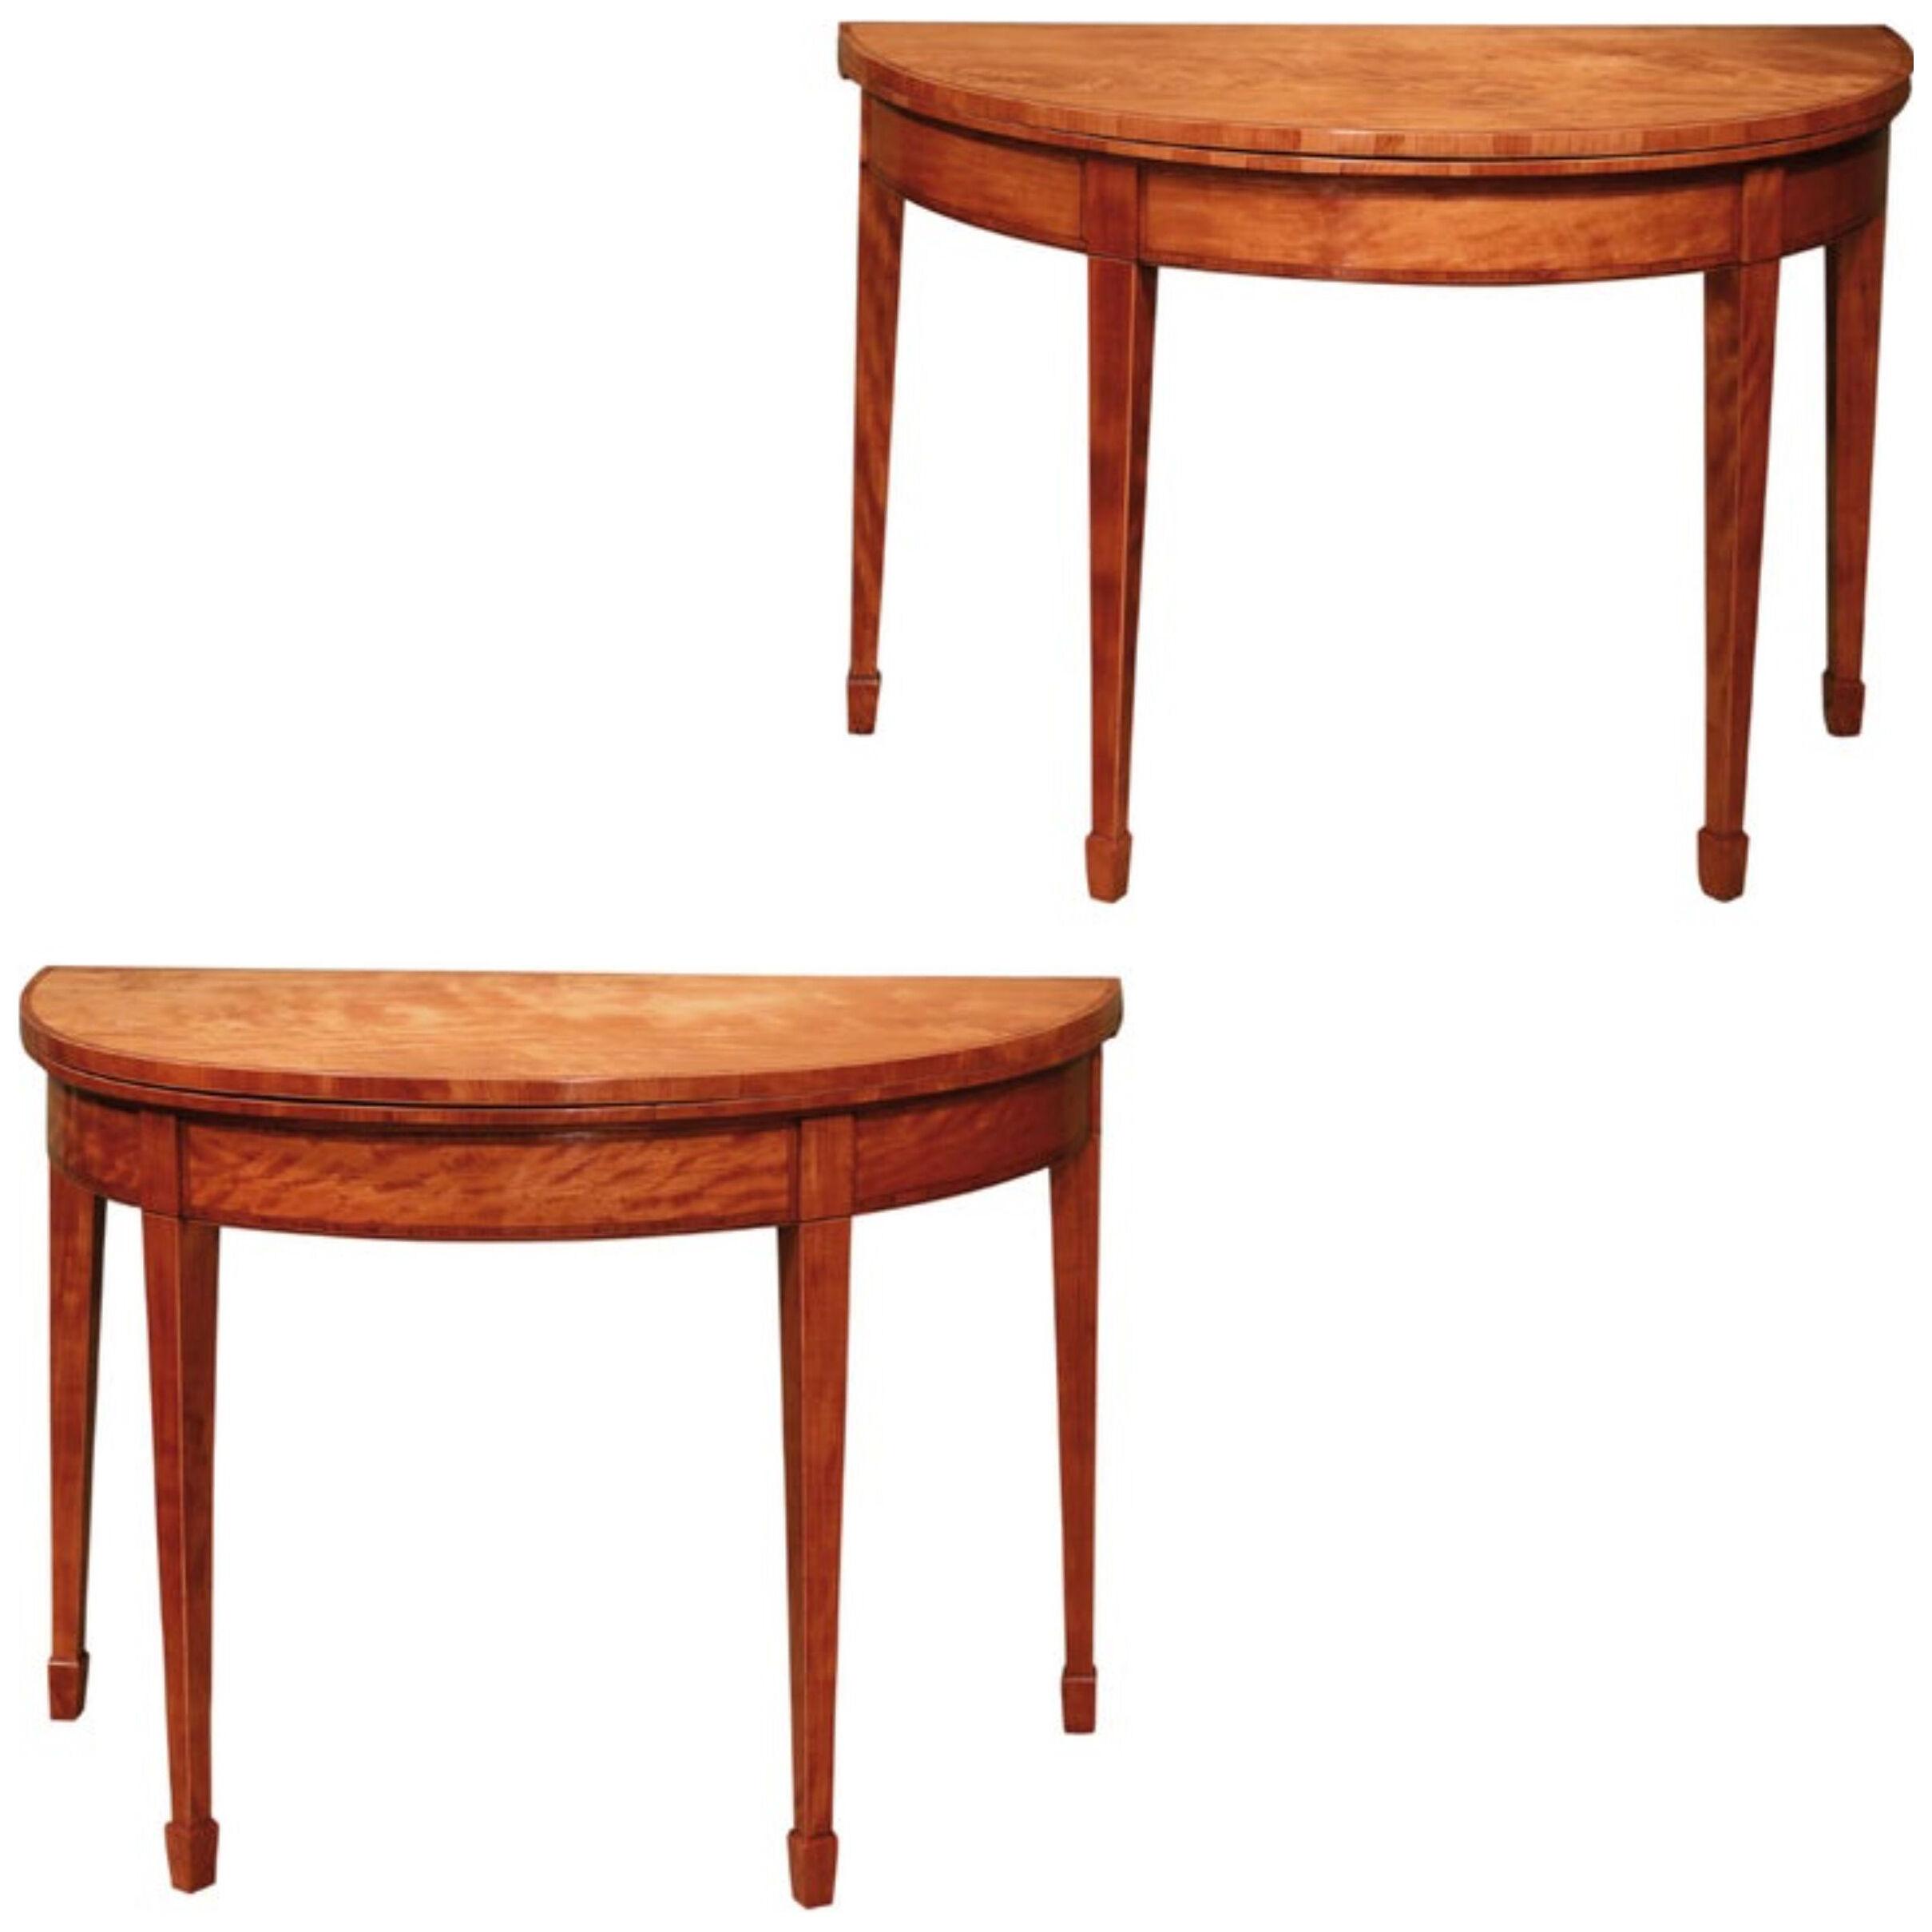 A pair of late 18th Century Sheraton Satinwood half round Card Tables